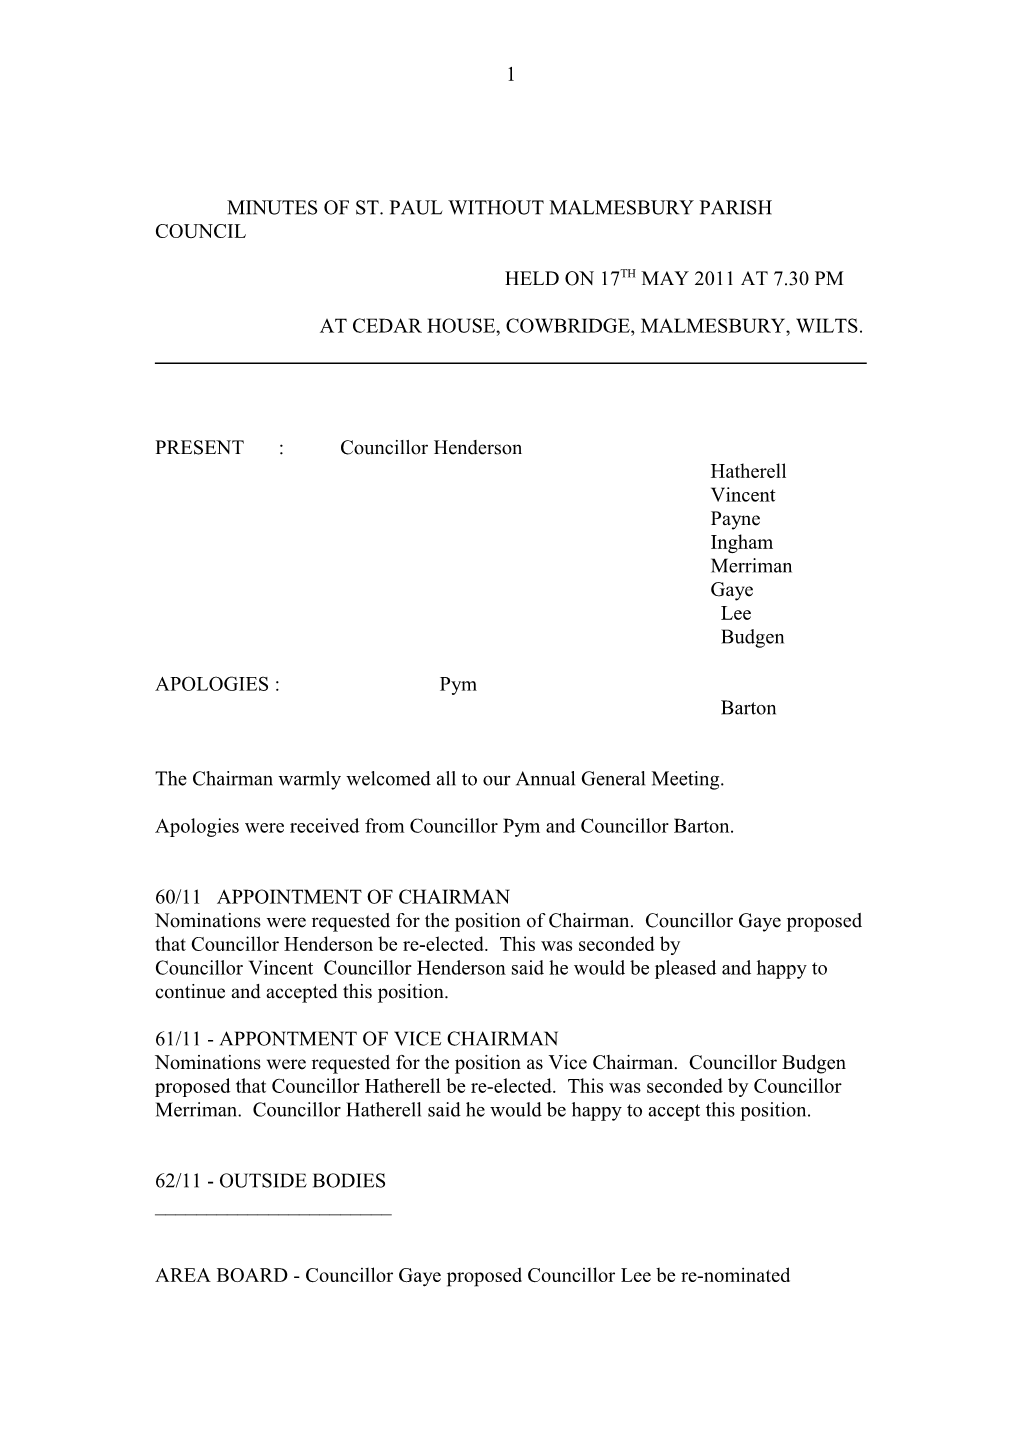 Minutes of St. Paul Without Malmesbury Parish Council